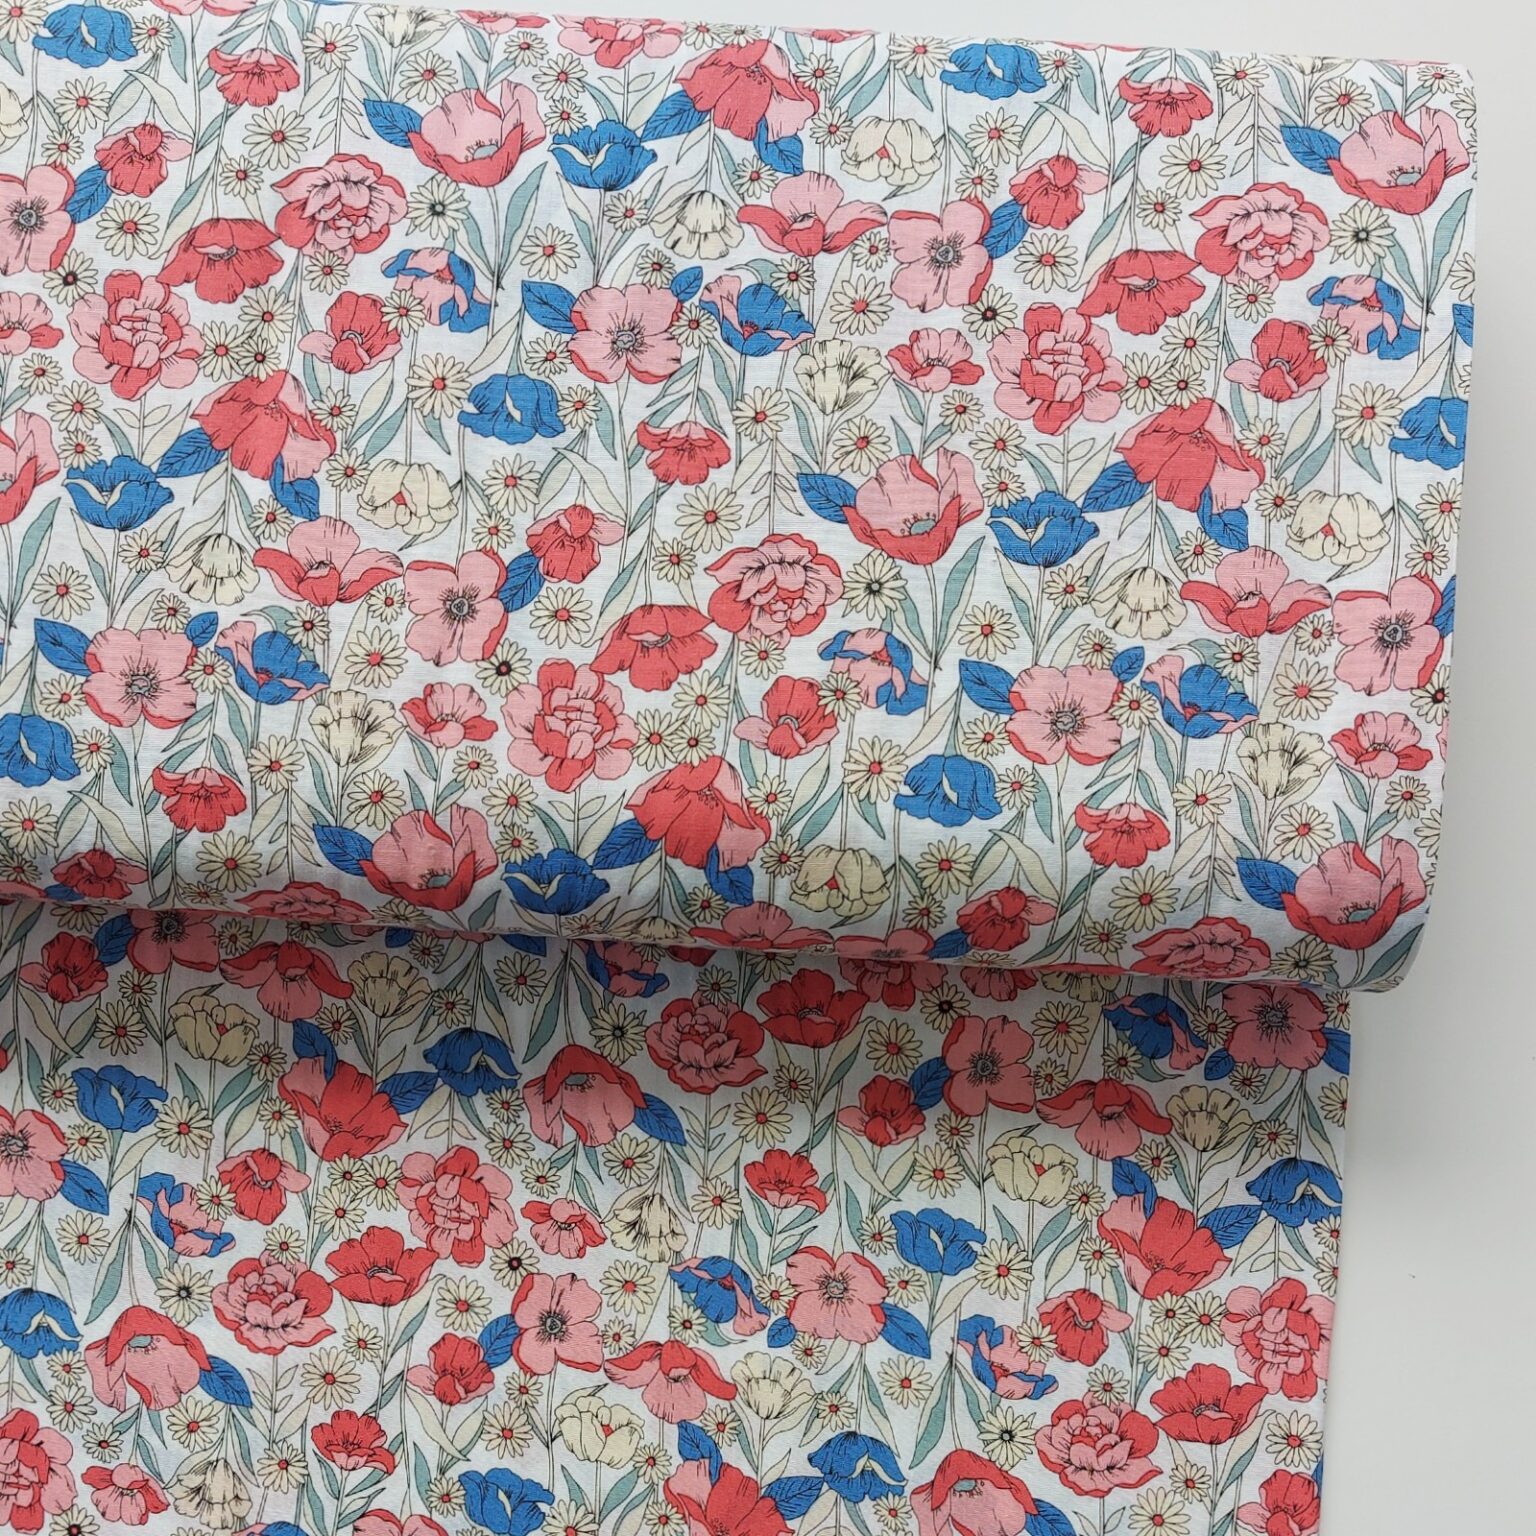 Pink Poppy cotton fabric | More Sewing